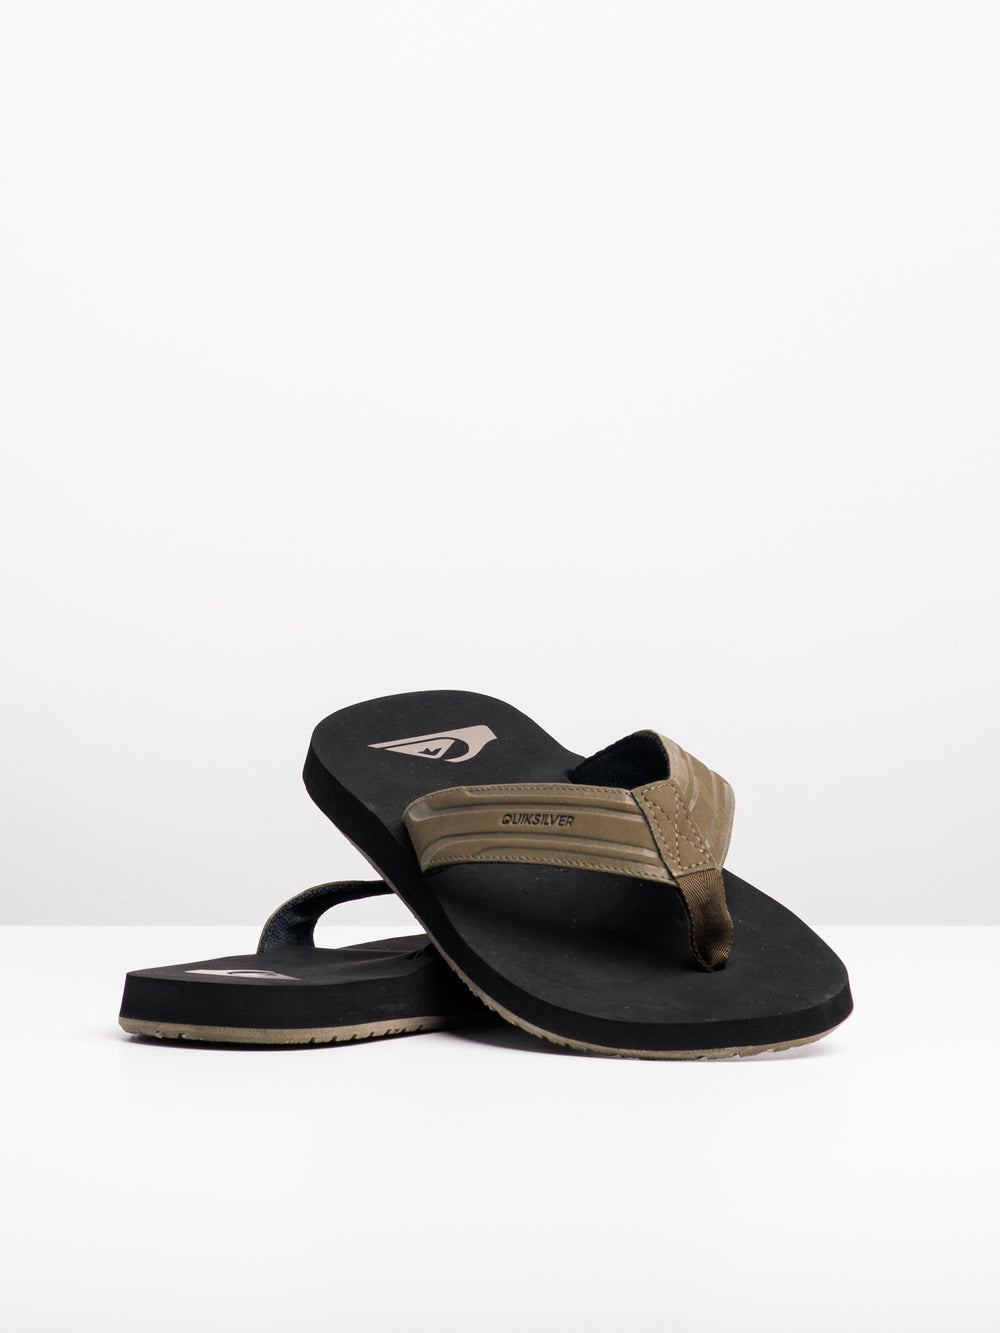 MENS QUIKSILVER MONKEY WRENCH TAN SOLID SANDALS